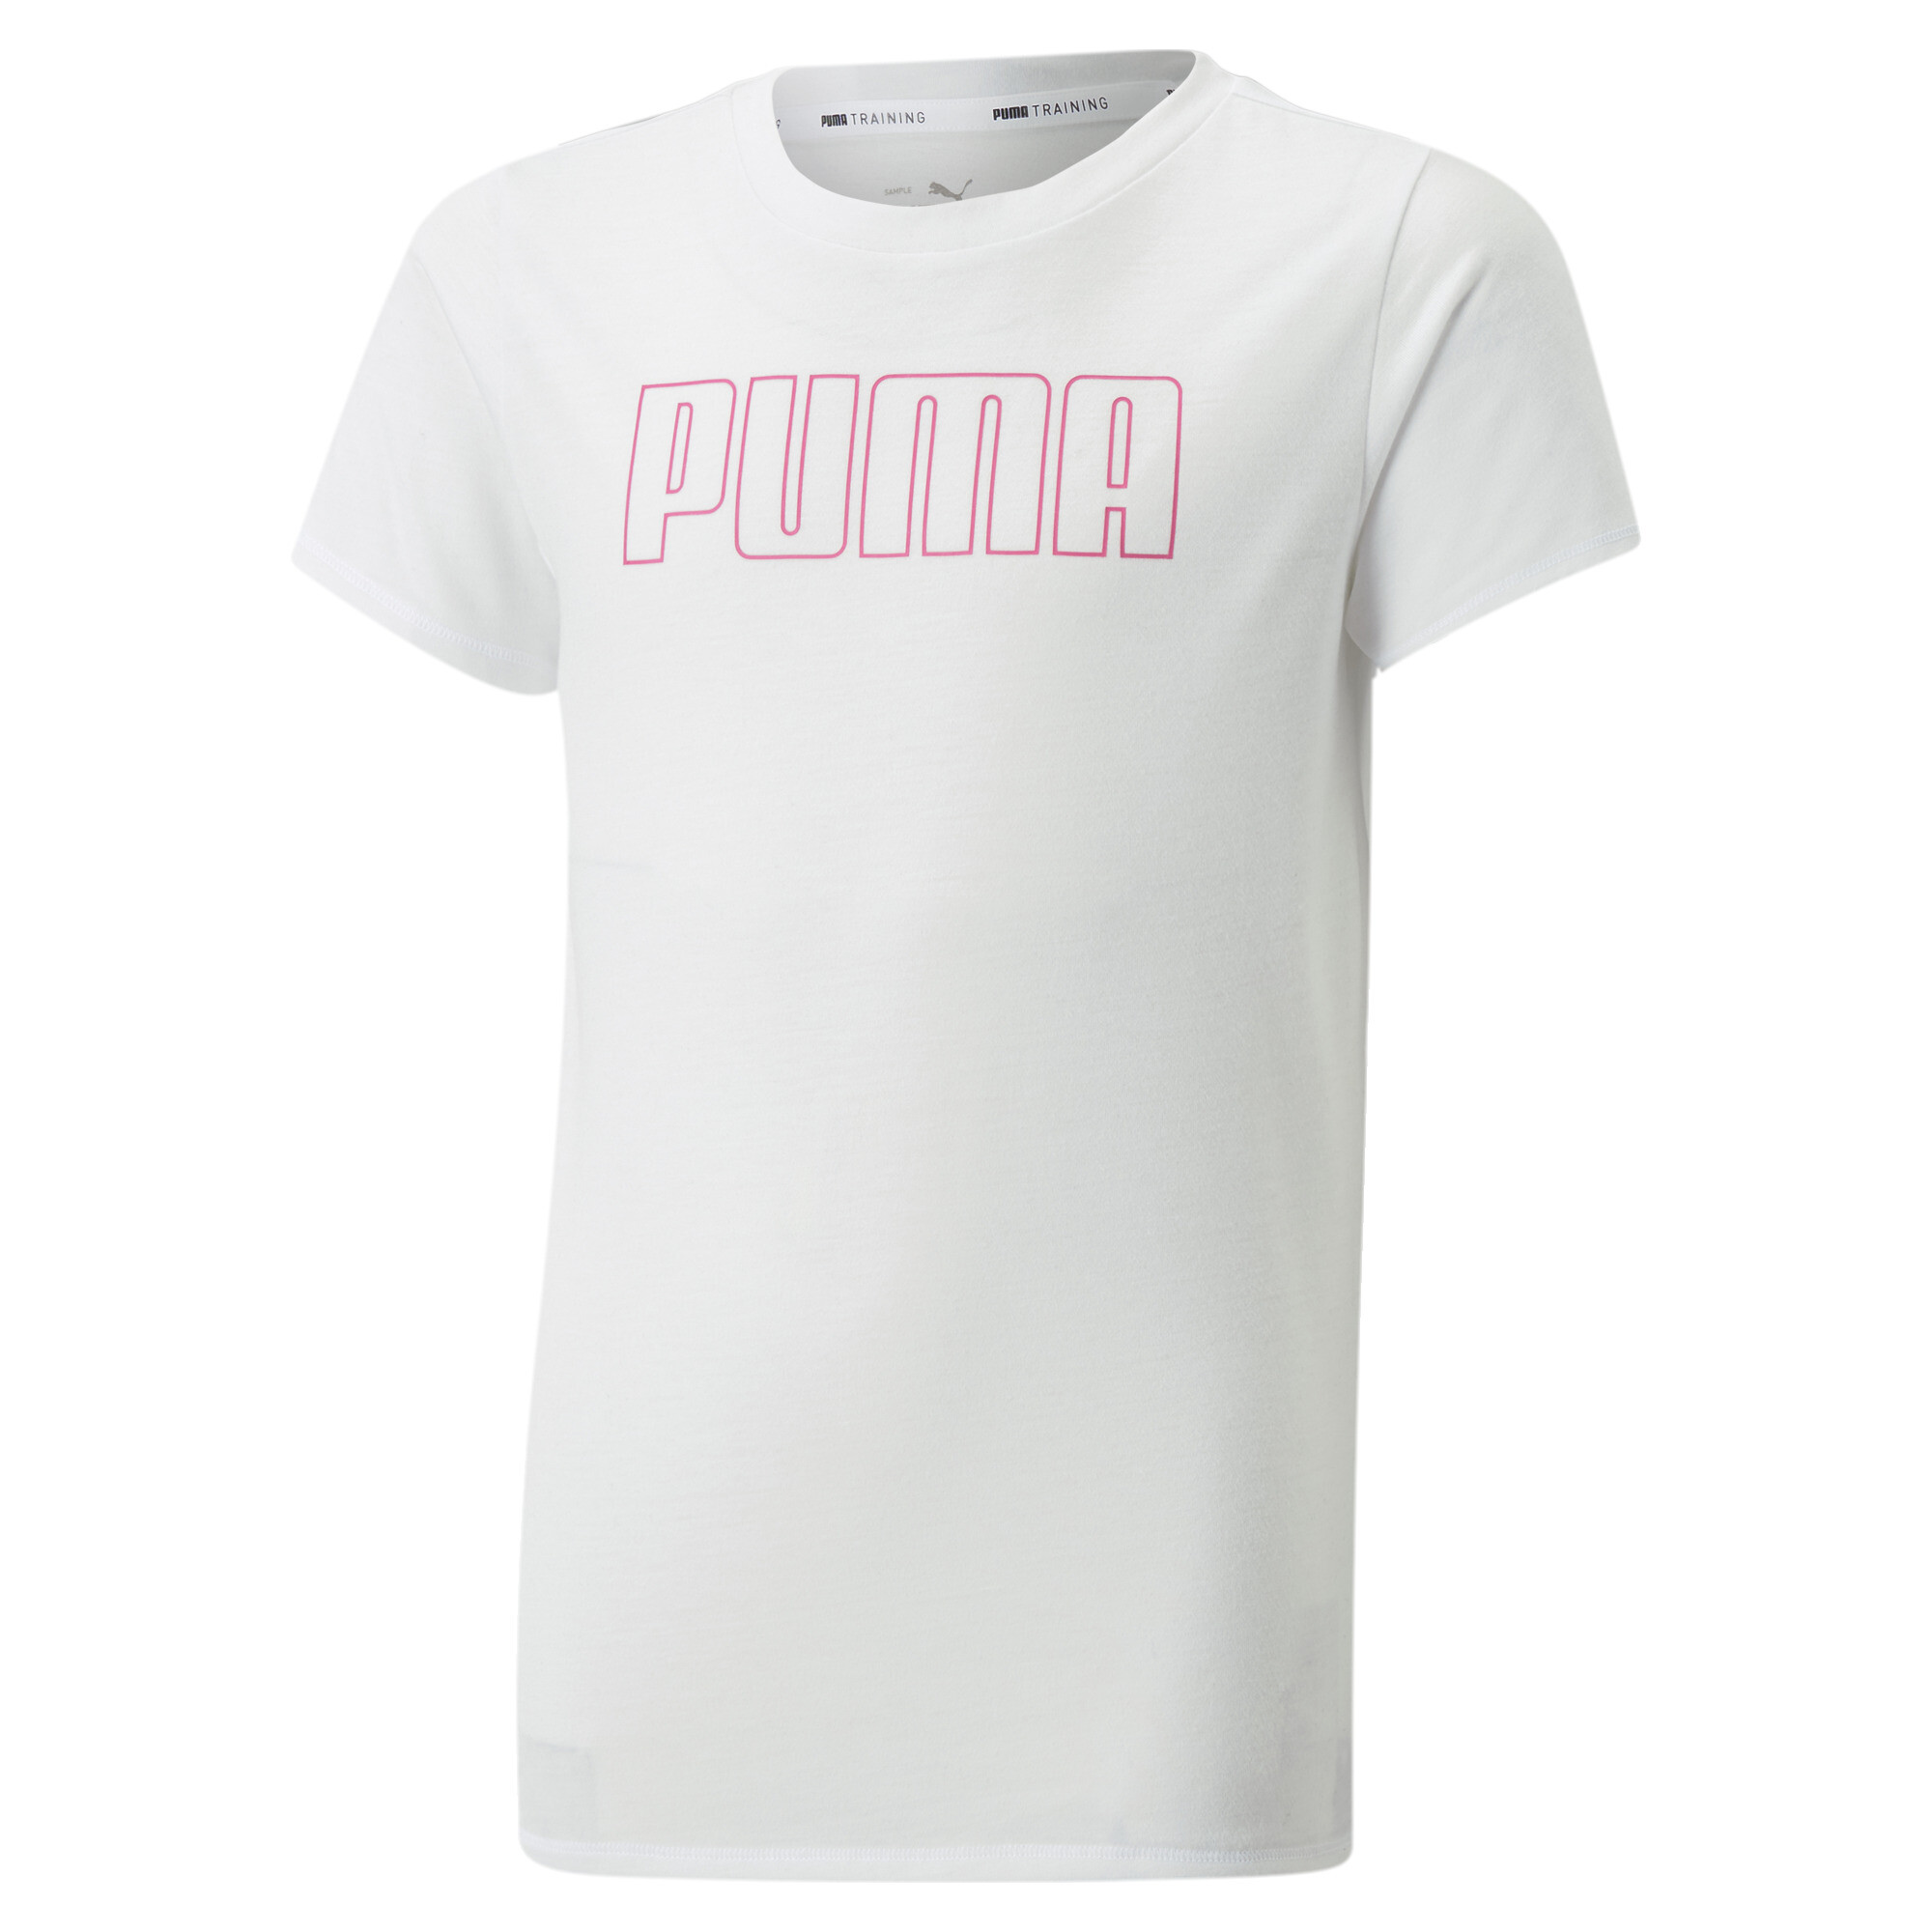 PUMA Favourites T-Shirt In White, Size 4-5 Youth